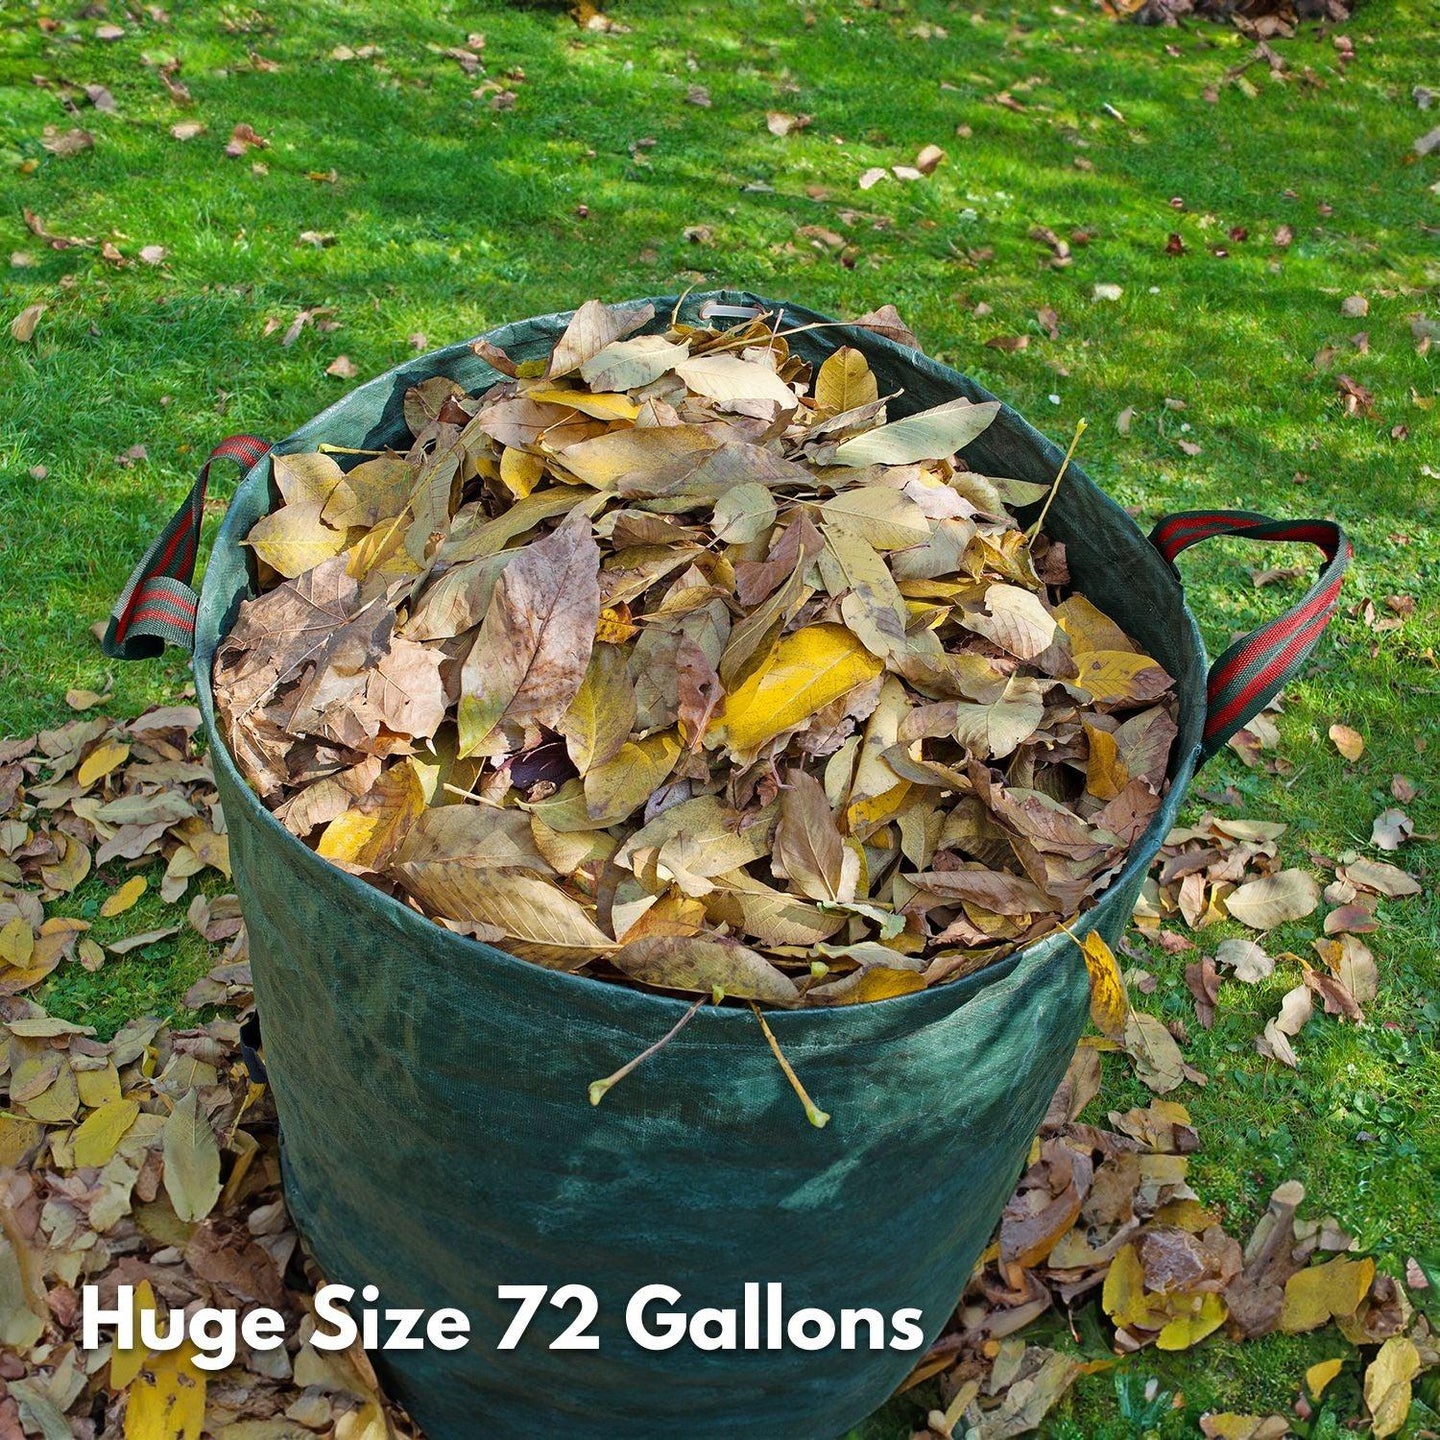 NOVEDEN 3 Packs Garden Waste Bags with 72 gallons (Green) NE-GWB-100-XS Products On Sale Australia | Home & Garden > Garden Tools Category